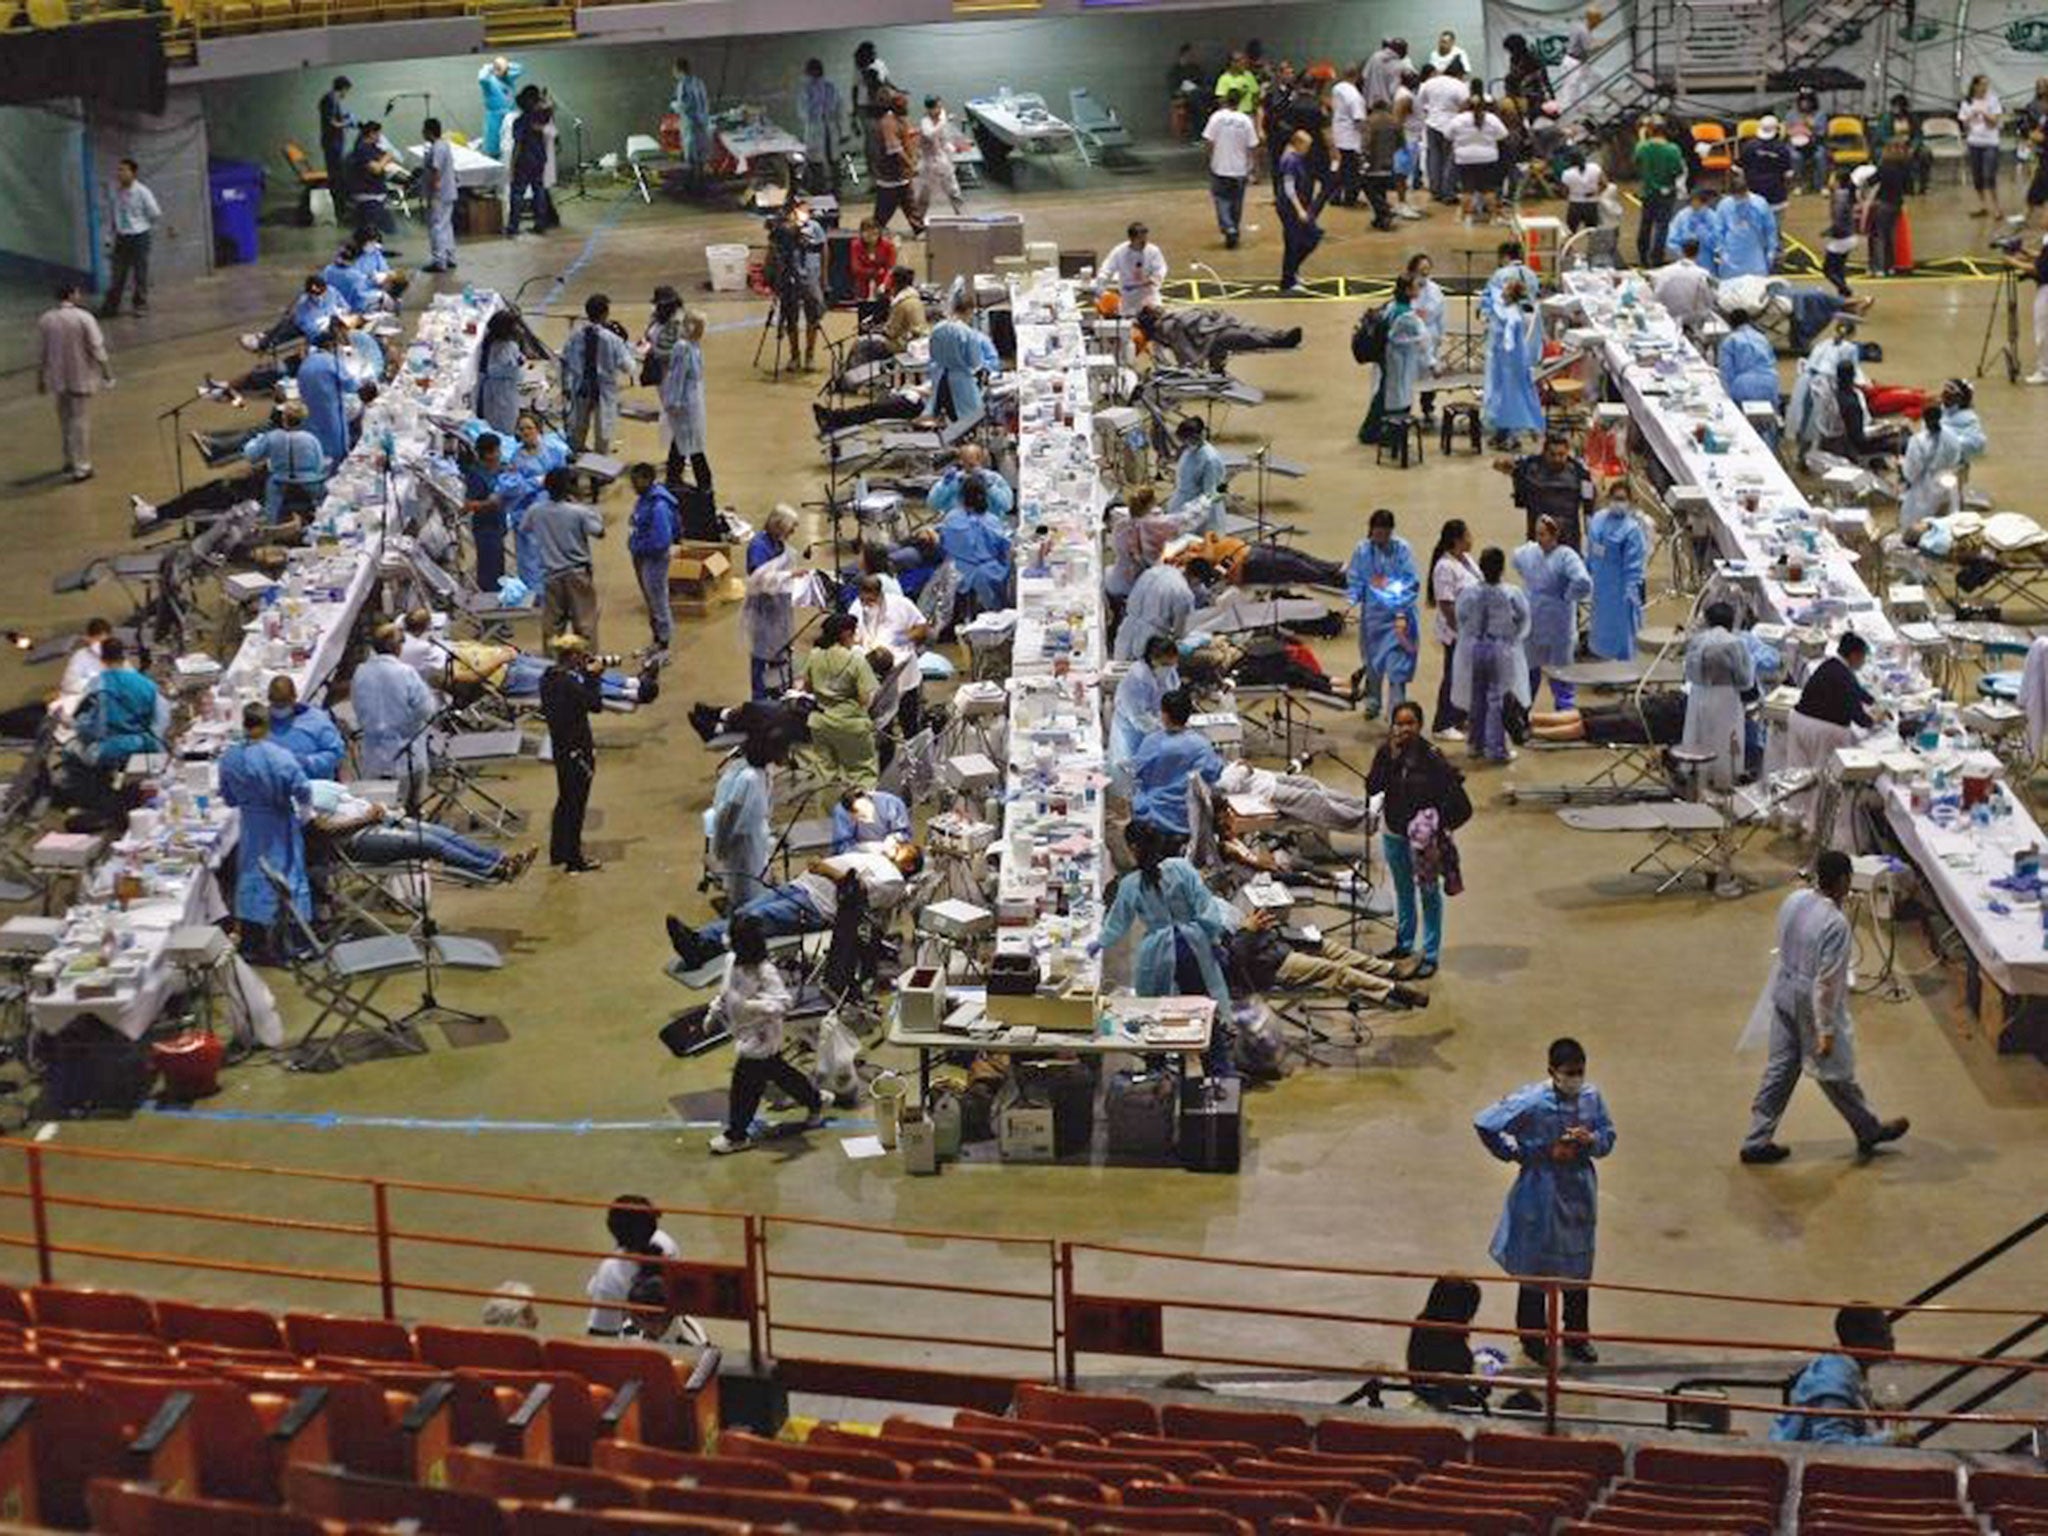 Open wide: rows of of dental chairs line the floor at a free health clinic in California